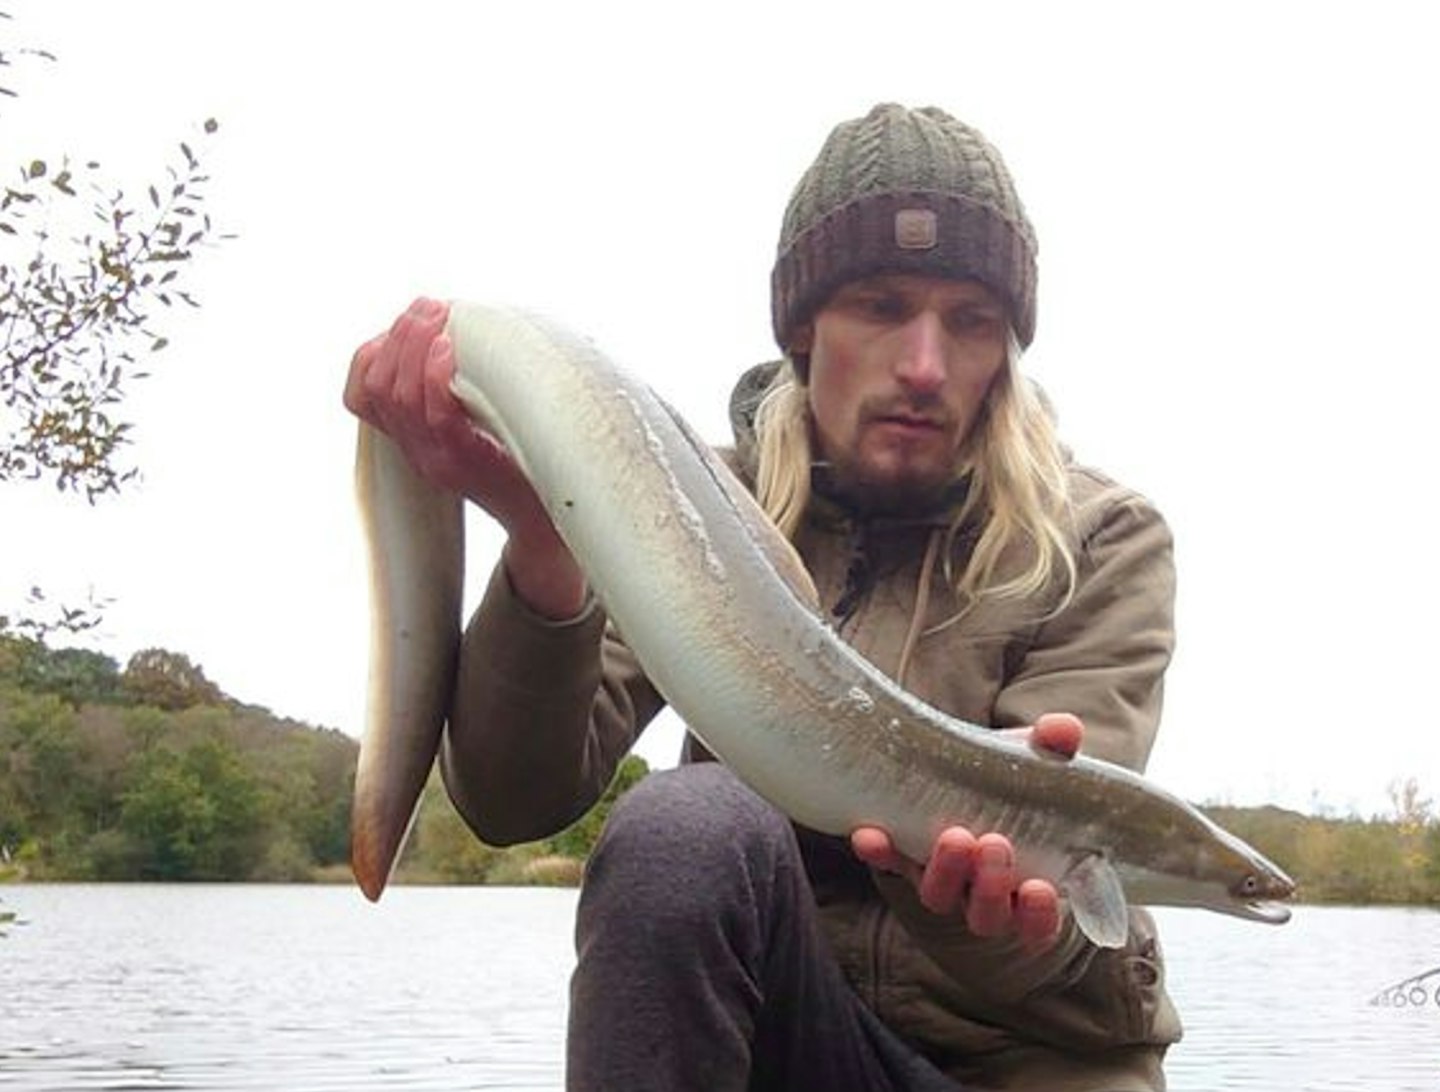 The 7lb 3oz eel which picked up Devon angler Peter Lilley’s boilie hookbait